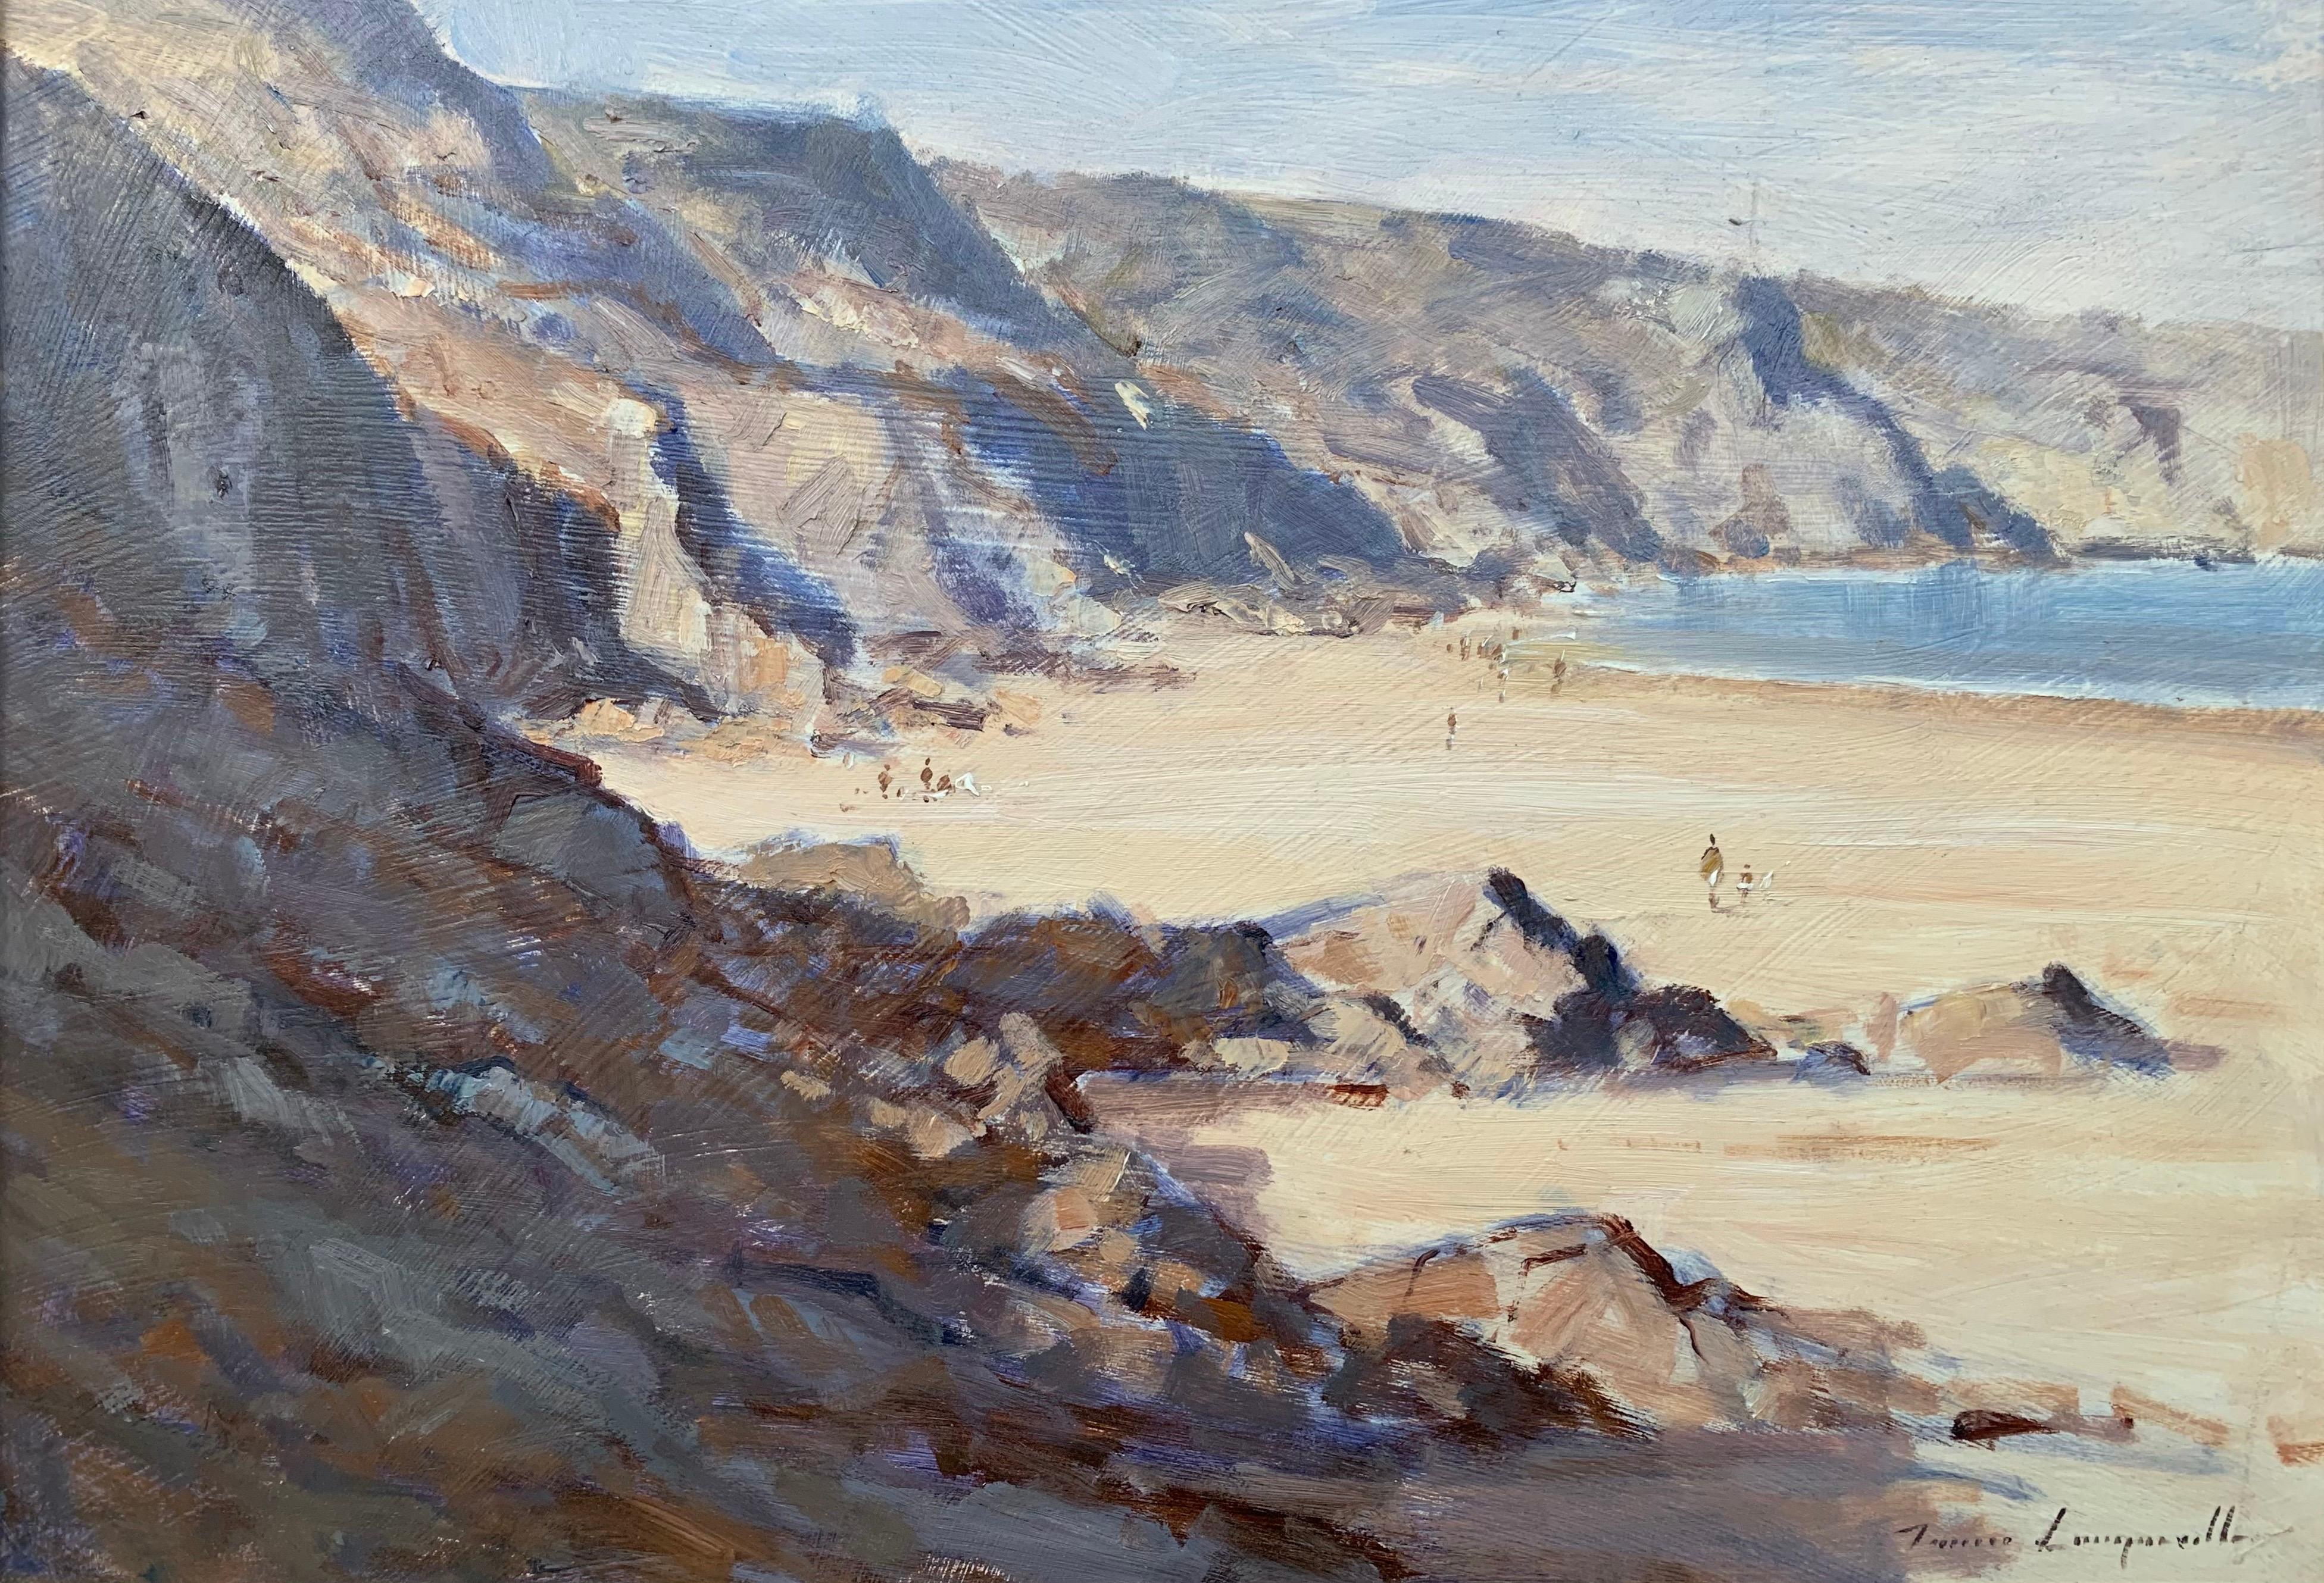 Landscape Seascape Painting of The Little Bay in Jersey by British Artist - Gray Landscape Painting by James Longueville